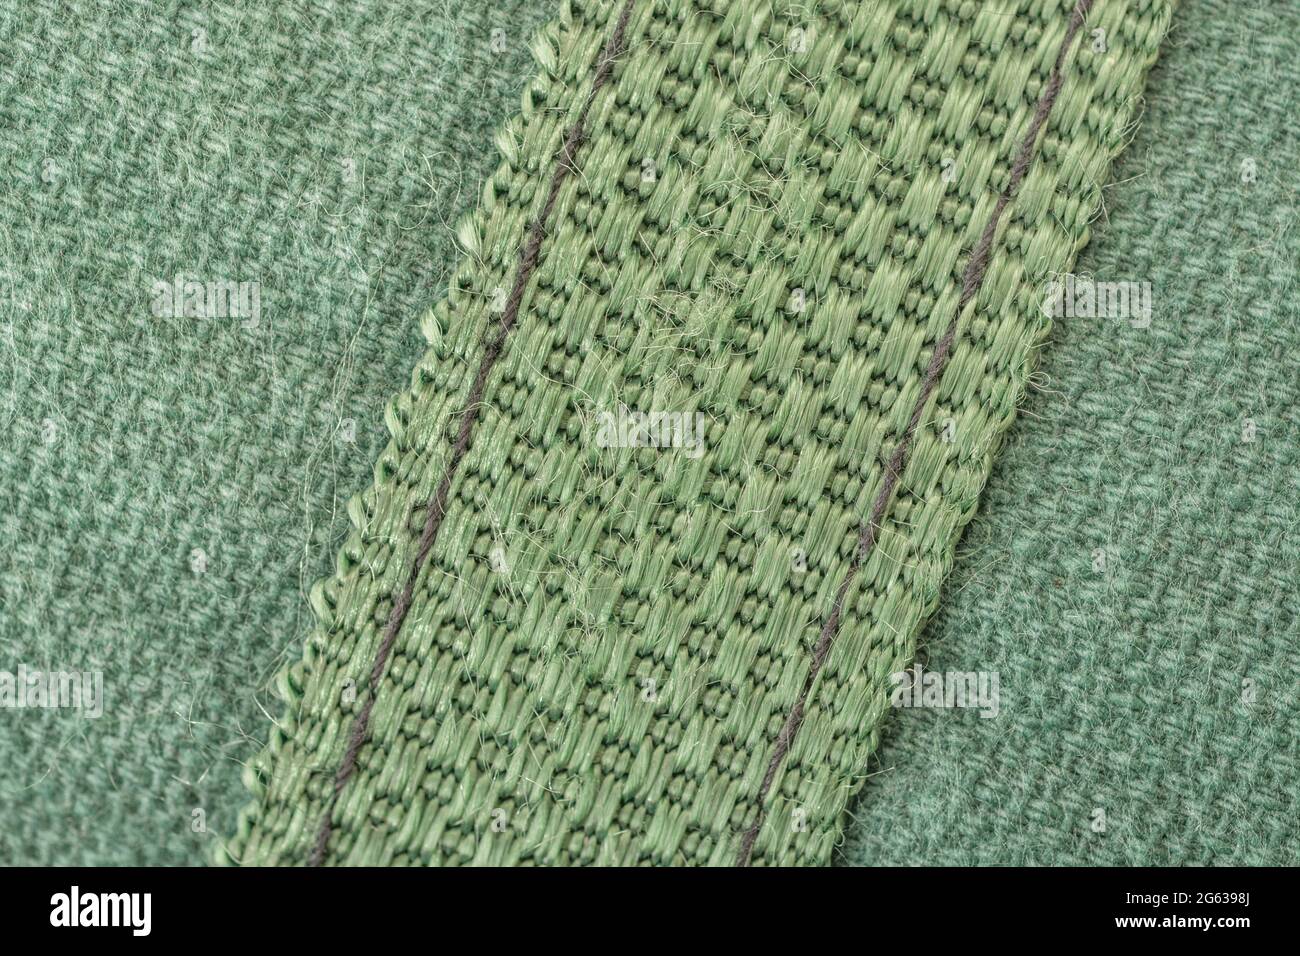 Abstract close-up macro shot of heavy duty stitching / stitches of canvas item. For stitch in time idiom, well secured, outdoor skills, bushcraft. Stock Photo